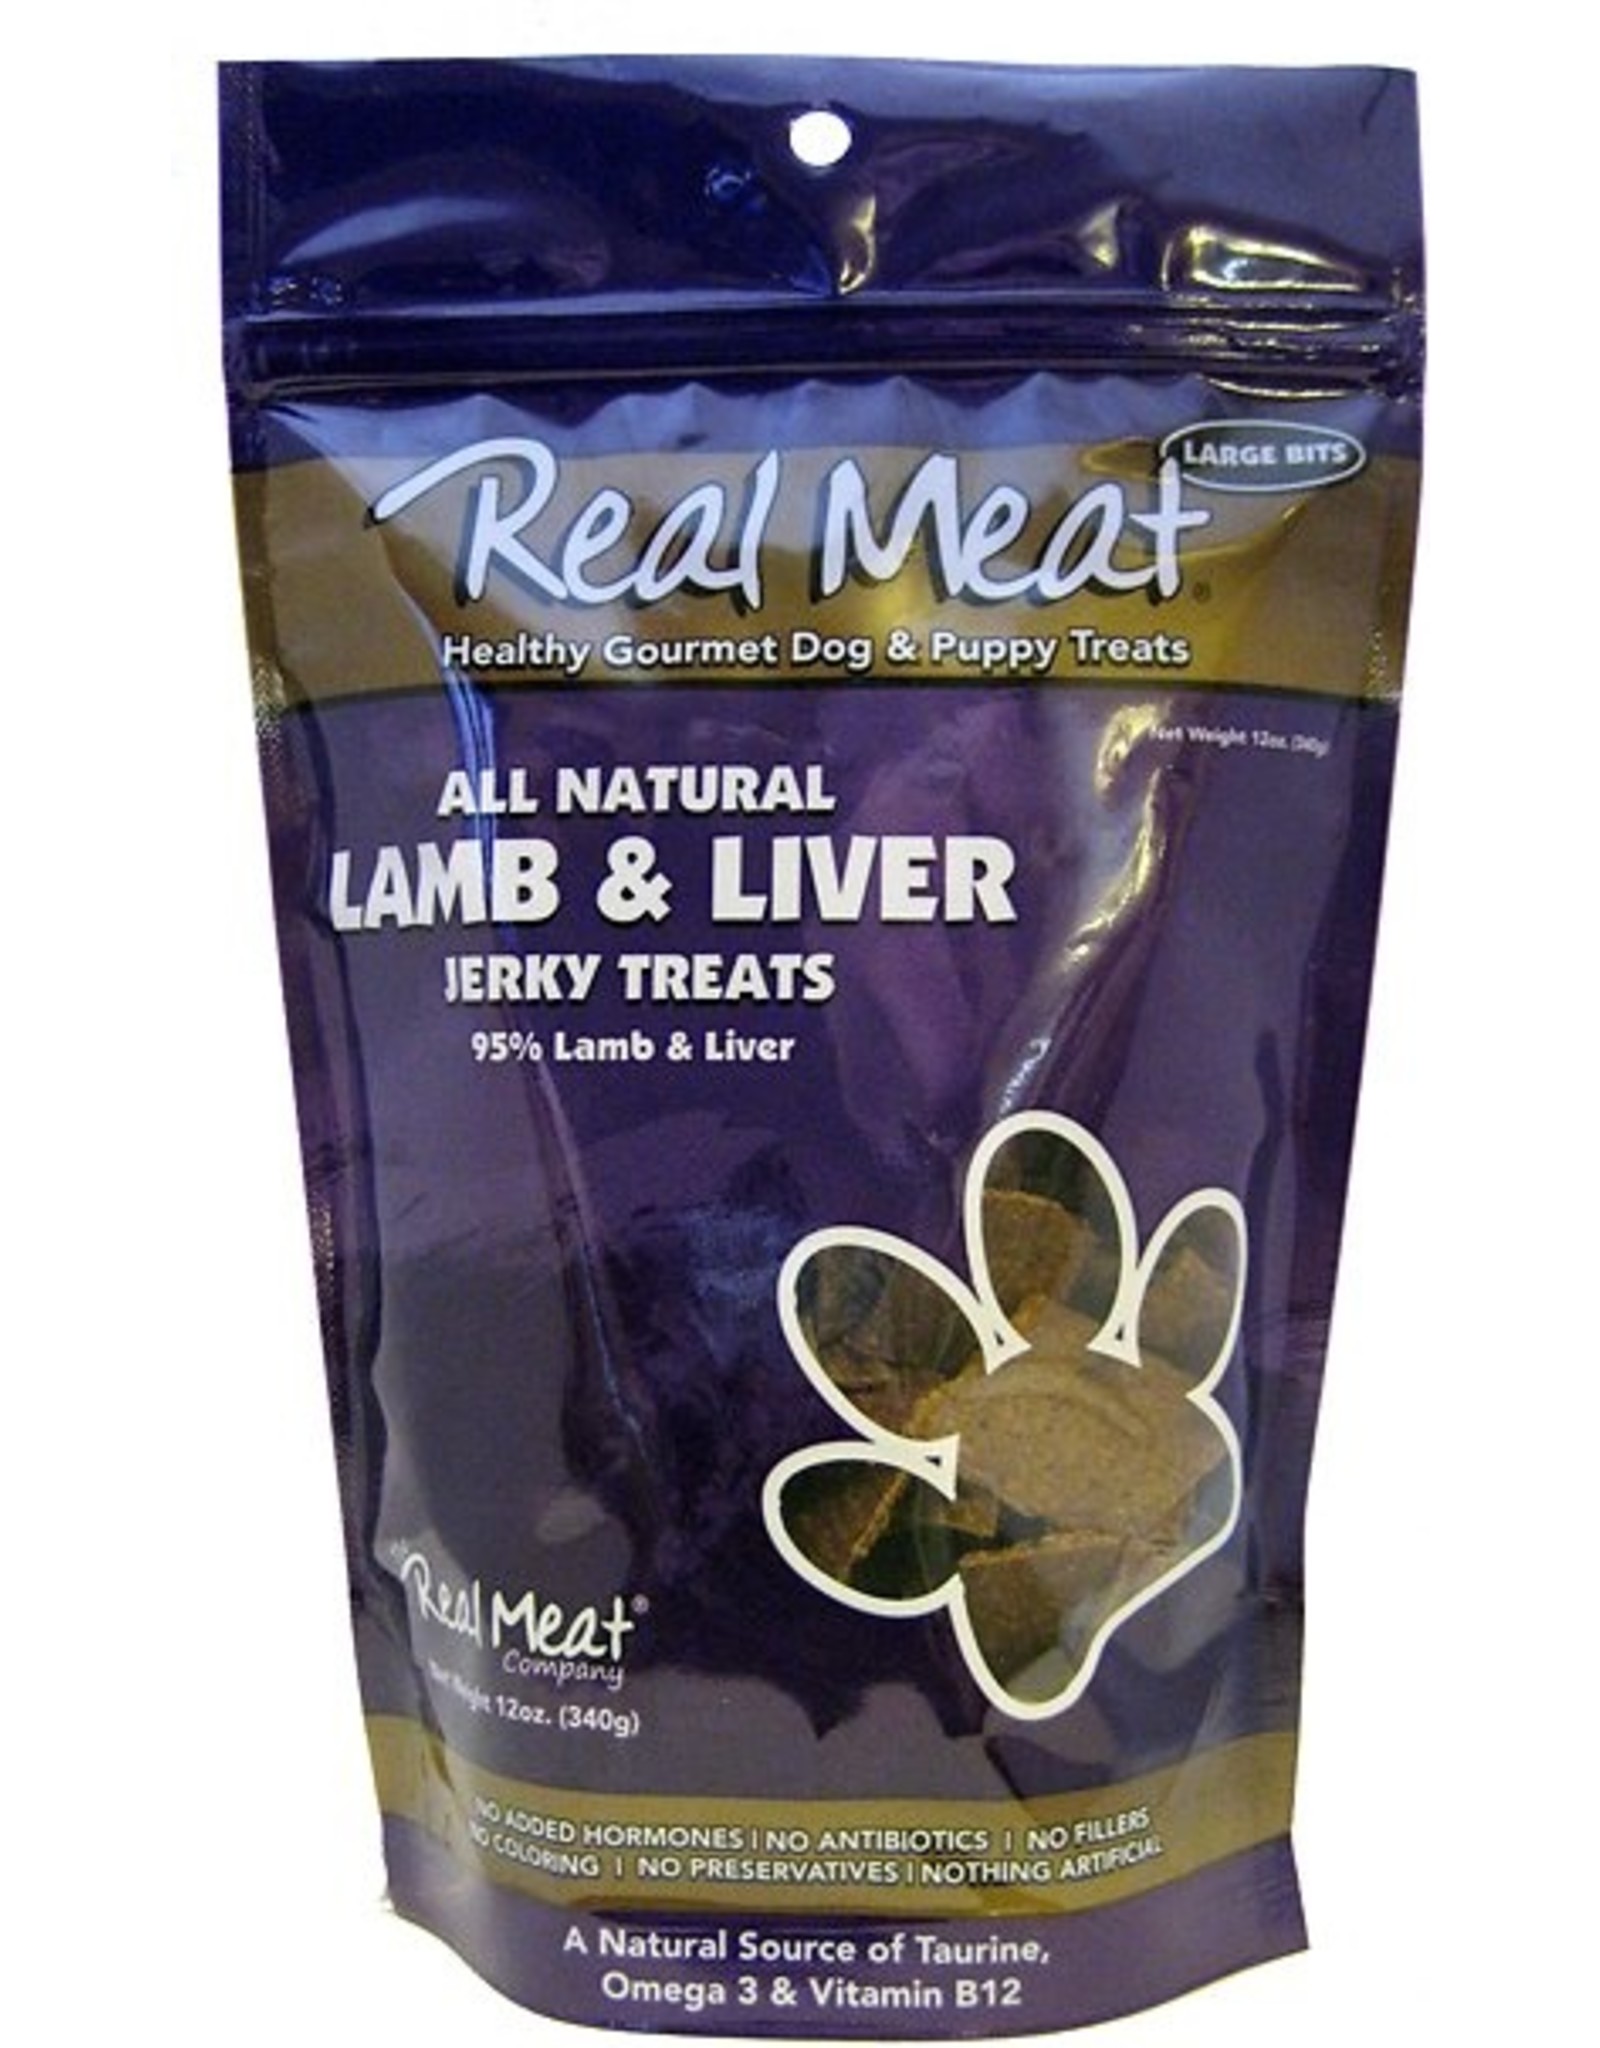 The Real Meat Company The Real Meat Dog Treats Lamb and Liver